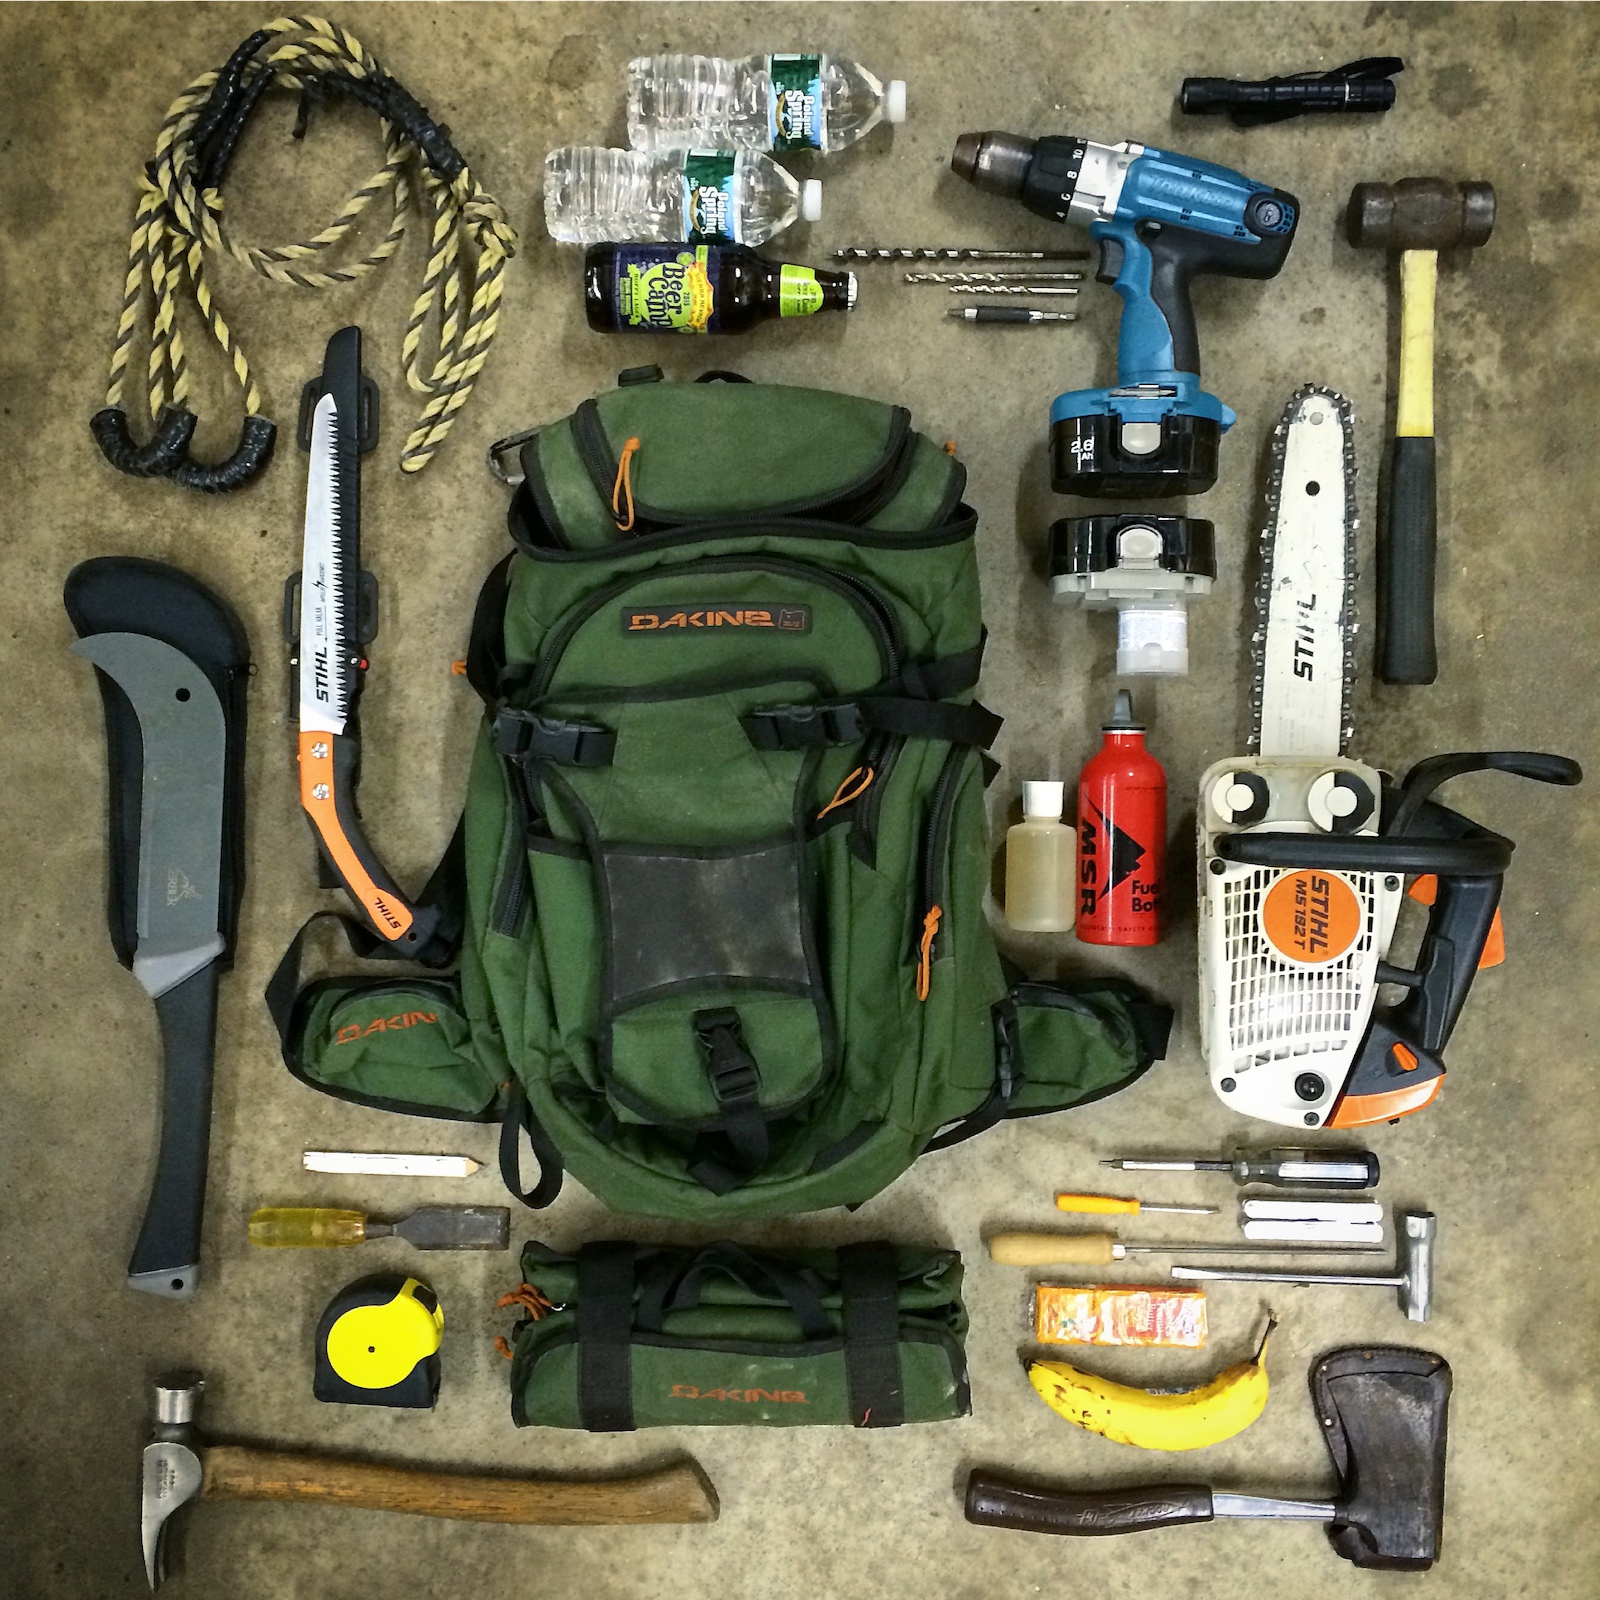 I always like seeing pics of the gear people lug around on their backs so I decided to take one of my trailwork kit I drag around. It all fits in the bag.